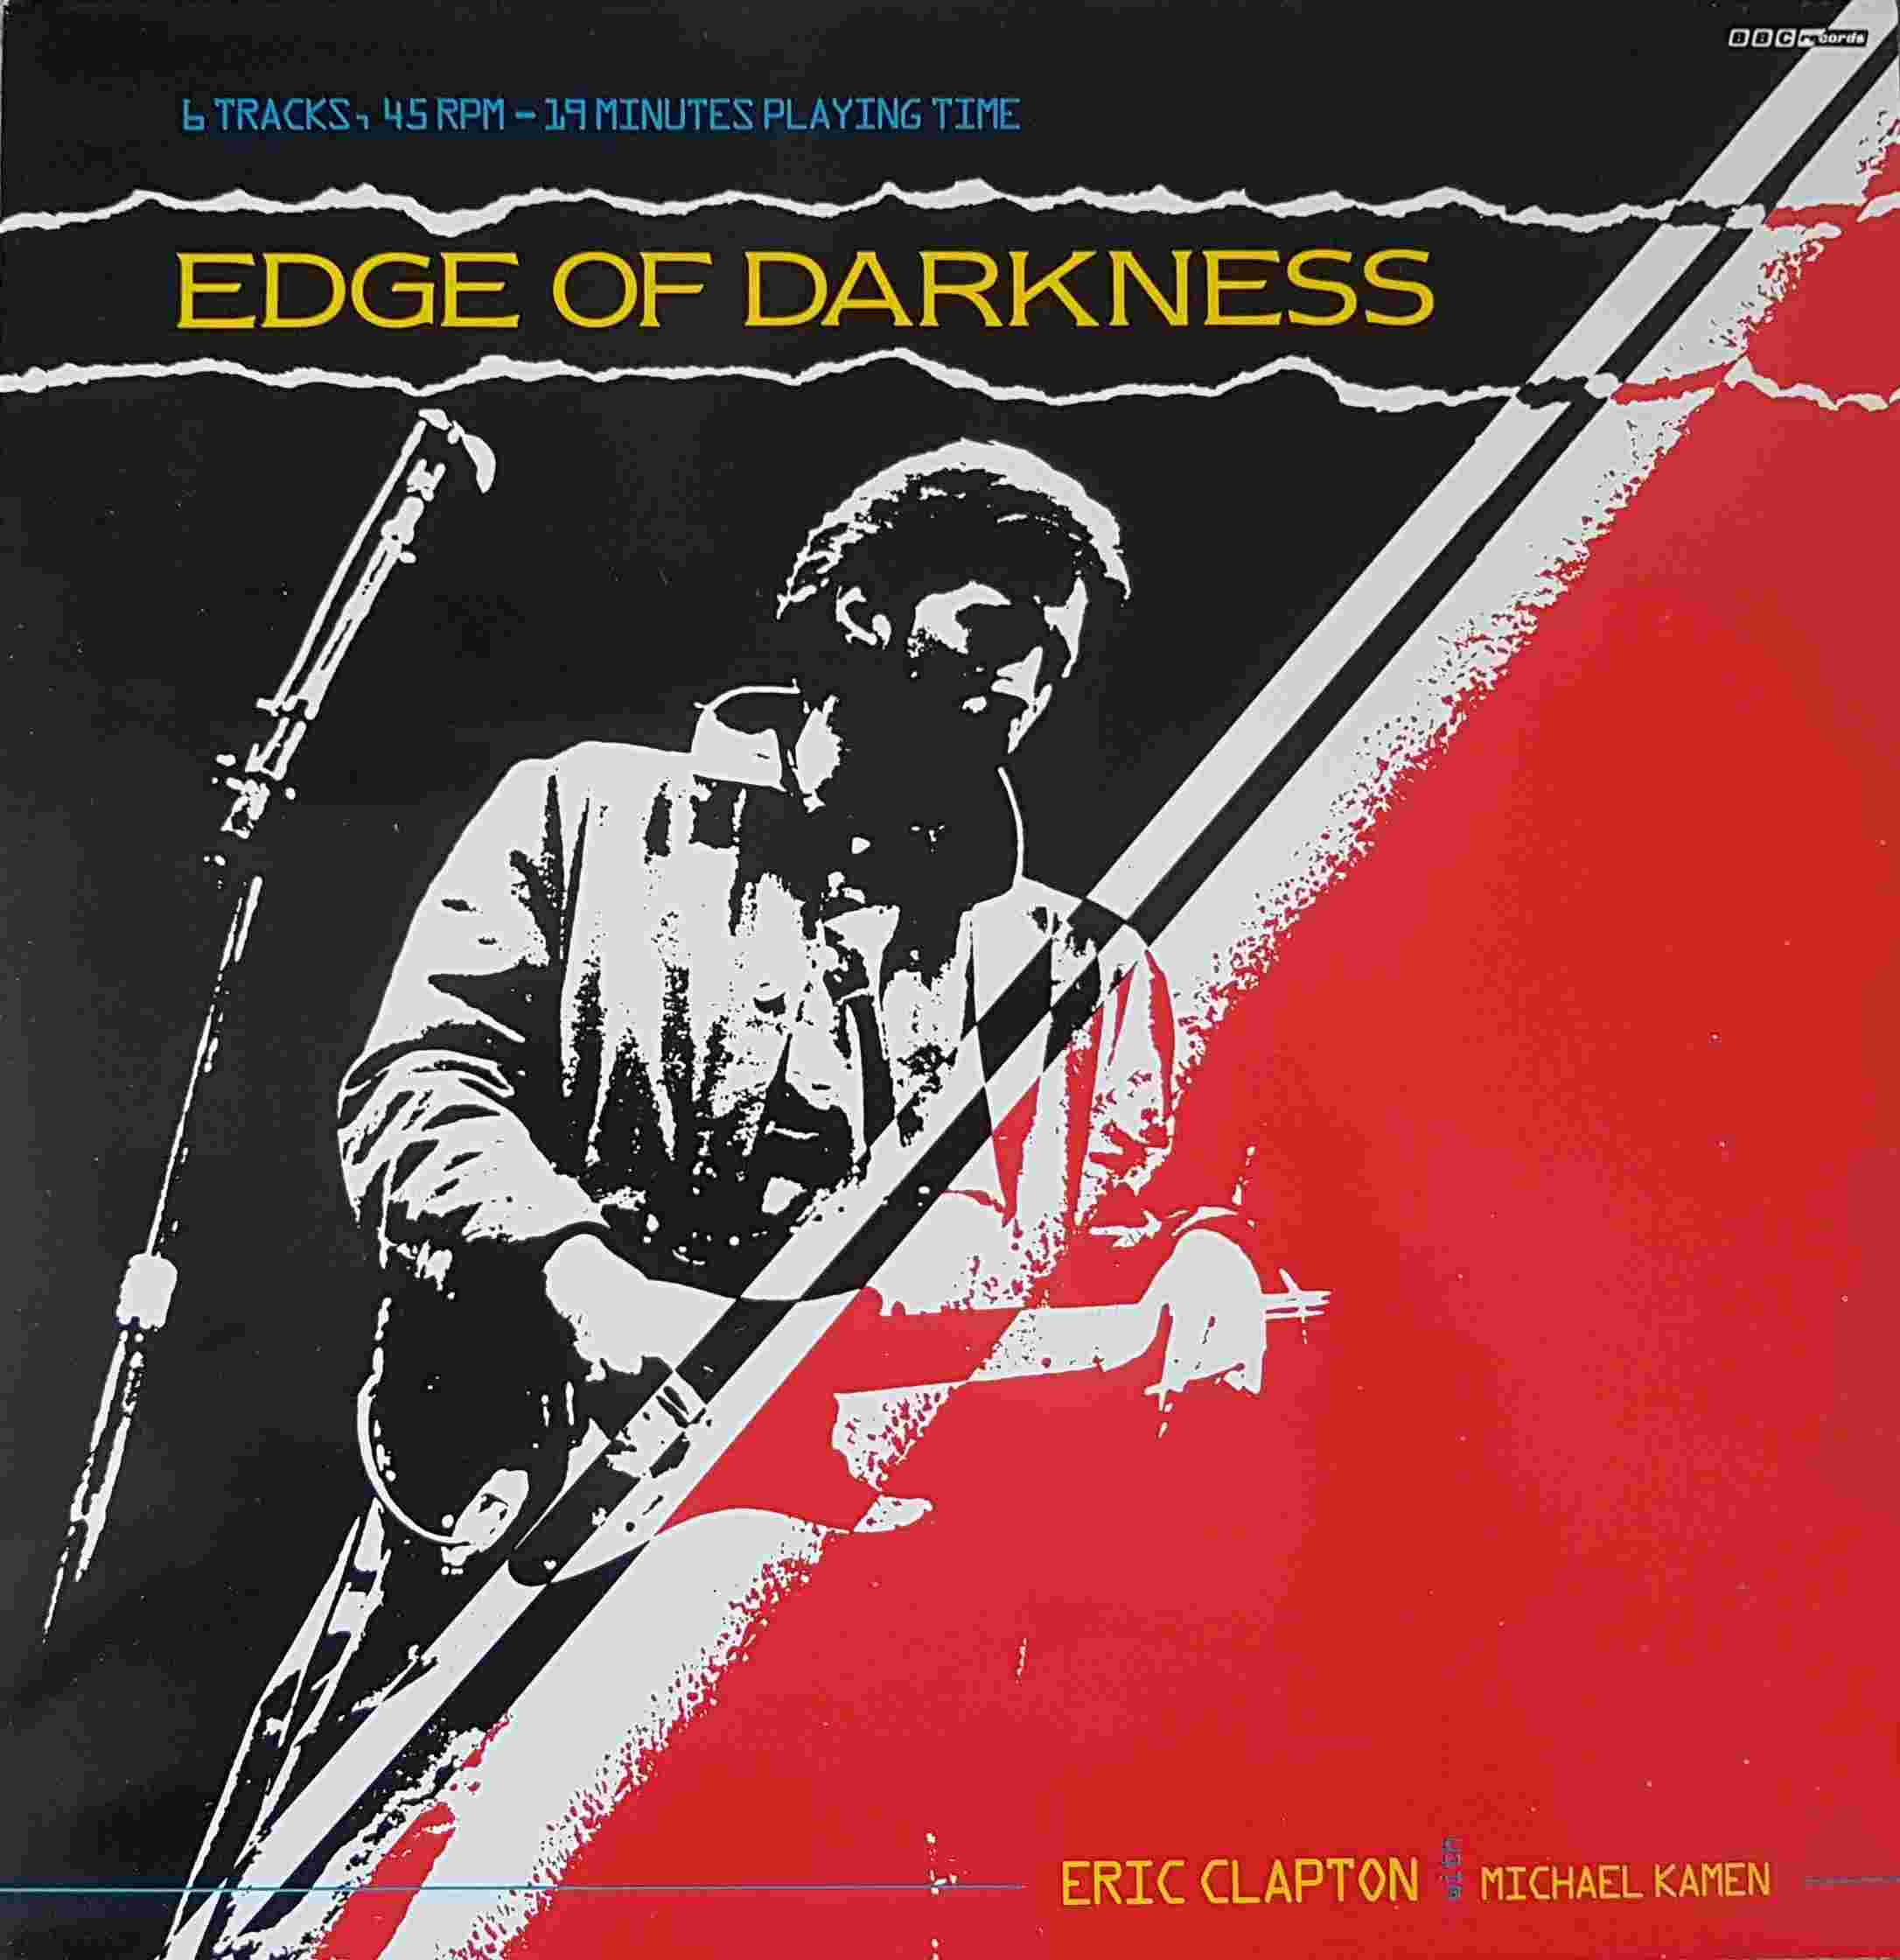 Picture of Edge of darkness by artist Eric Clapton / Mike Kamen from the BBC 12inches - Records and Tapes library